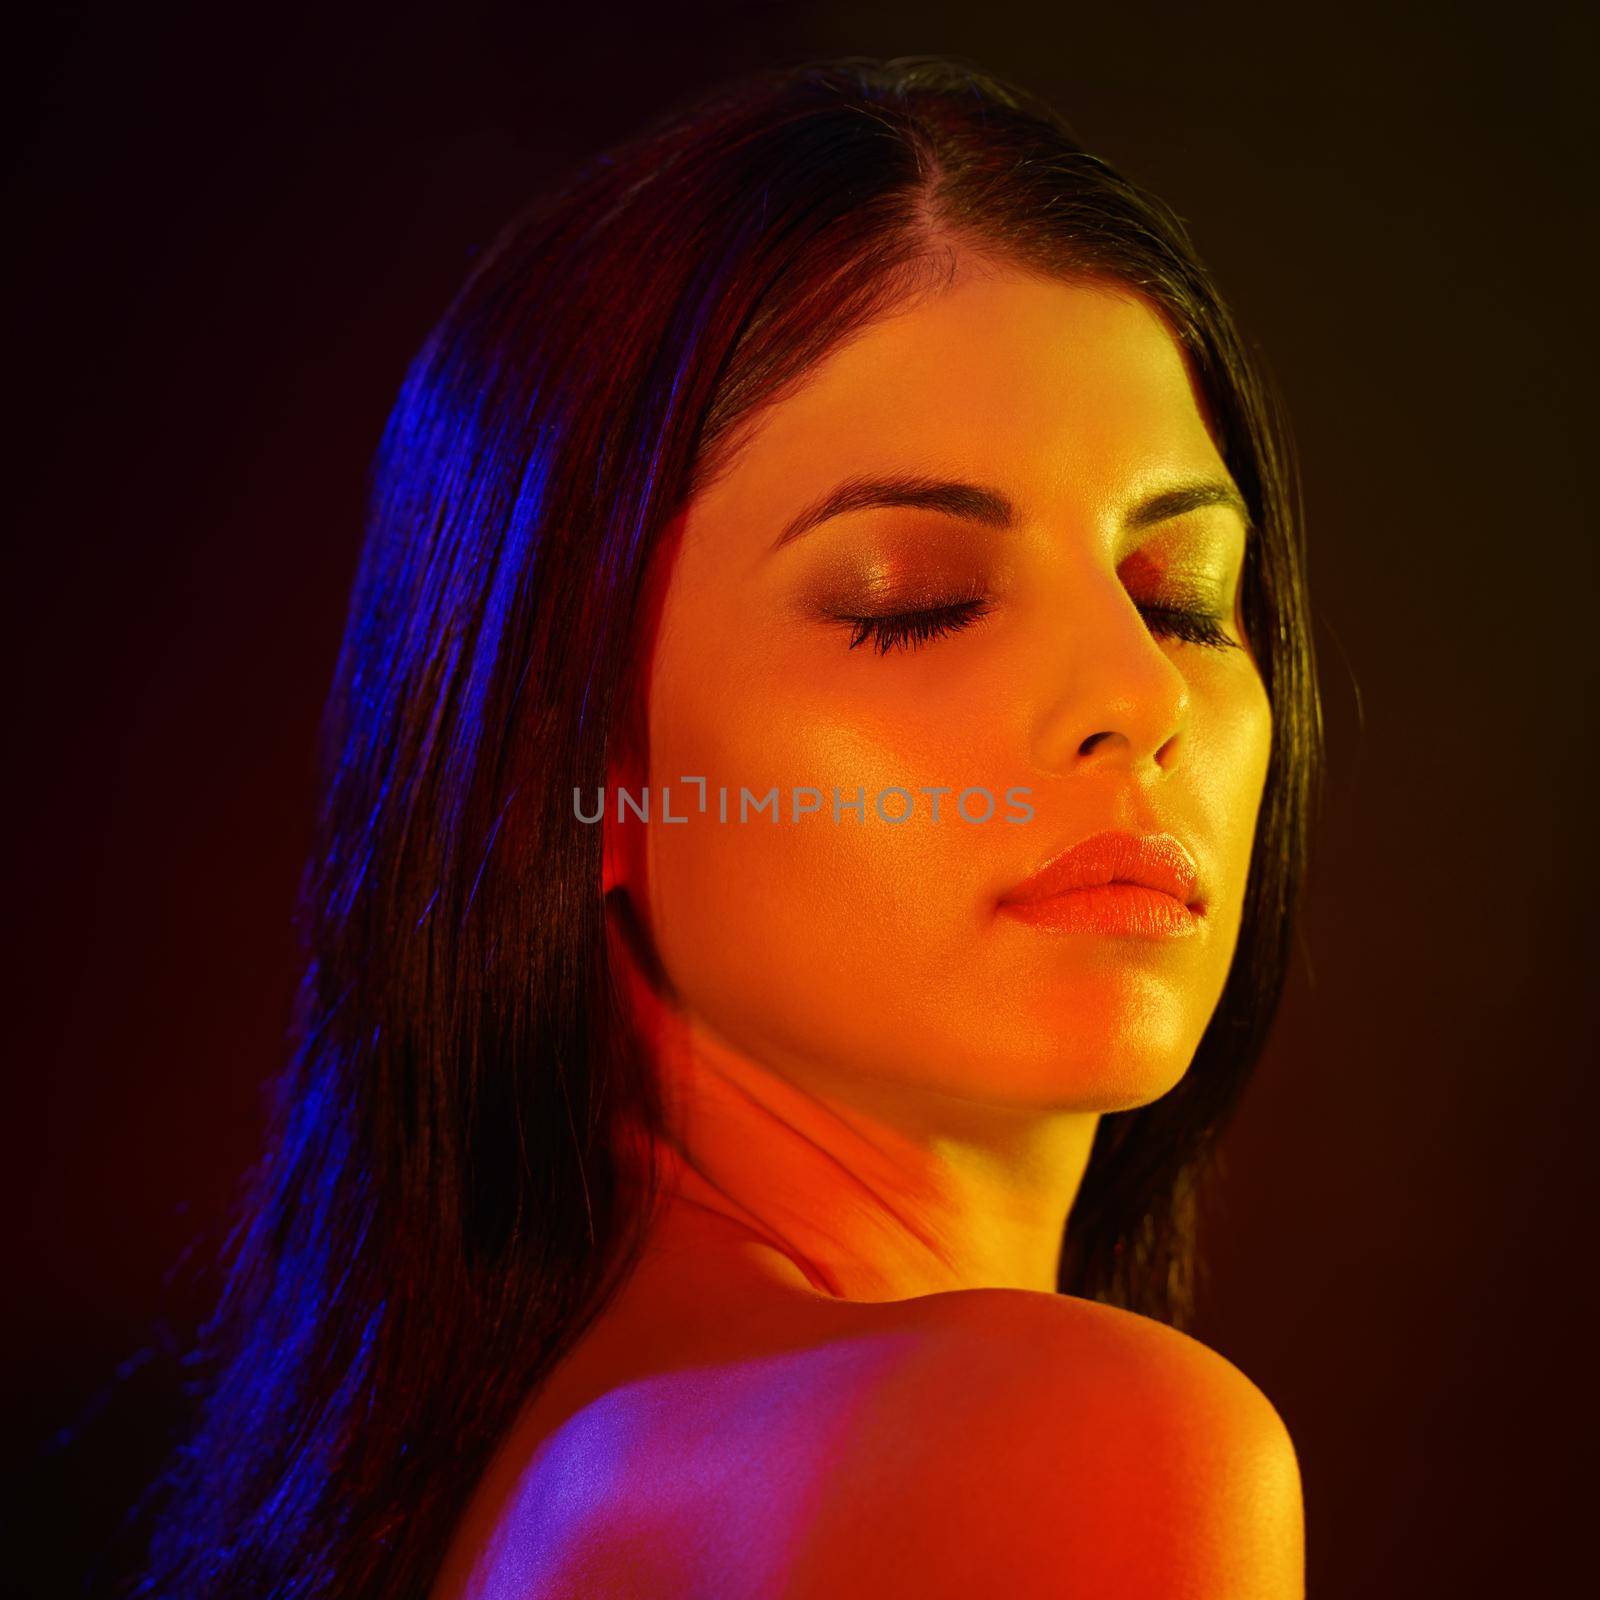 Her beauty lights up a room. Studio shot of a beautiful young woman with artistic lighting